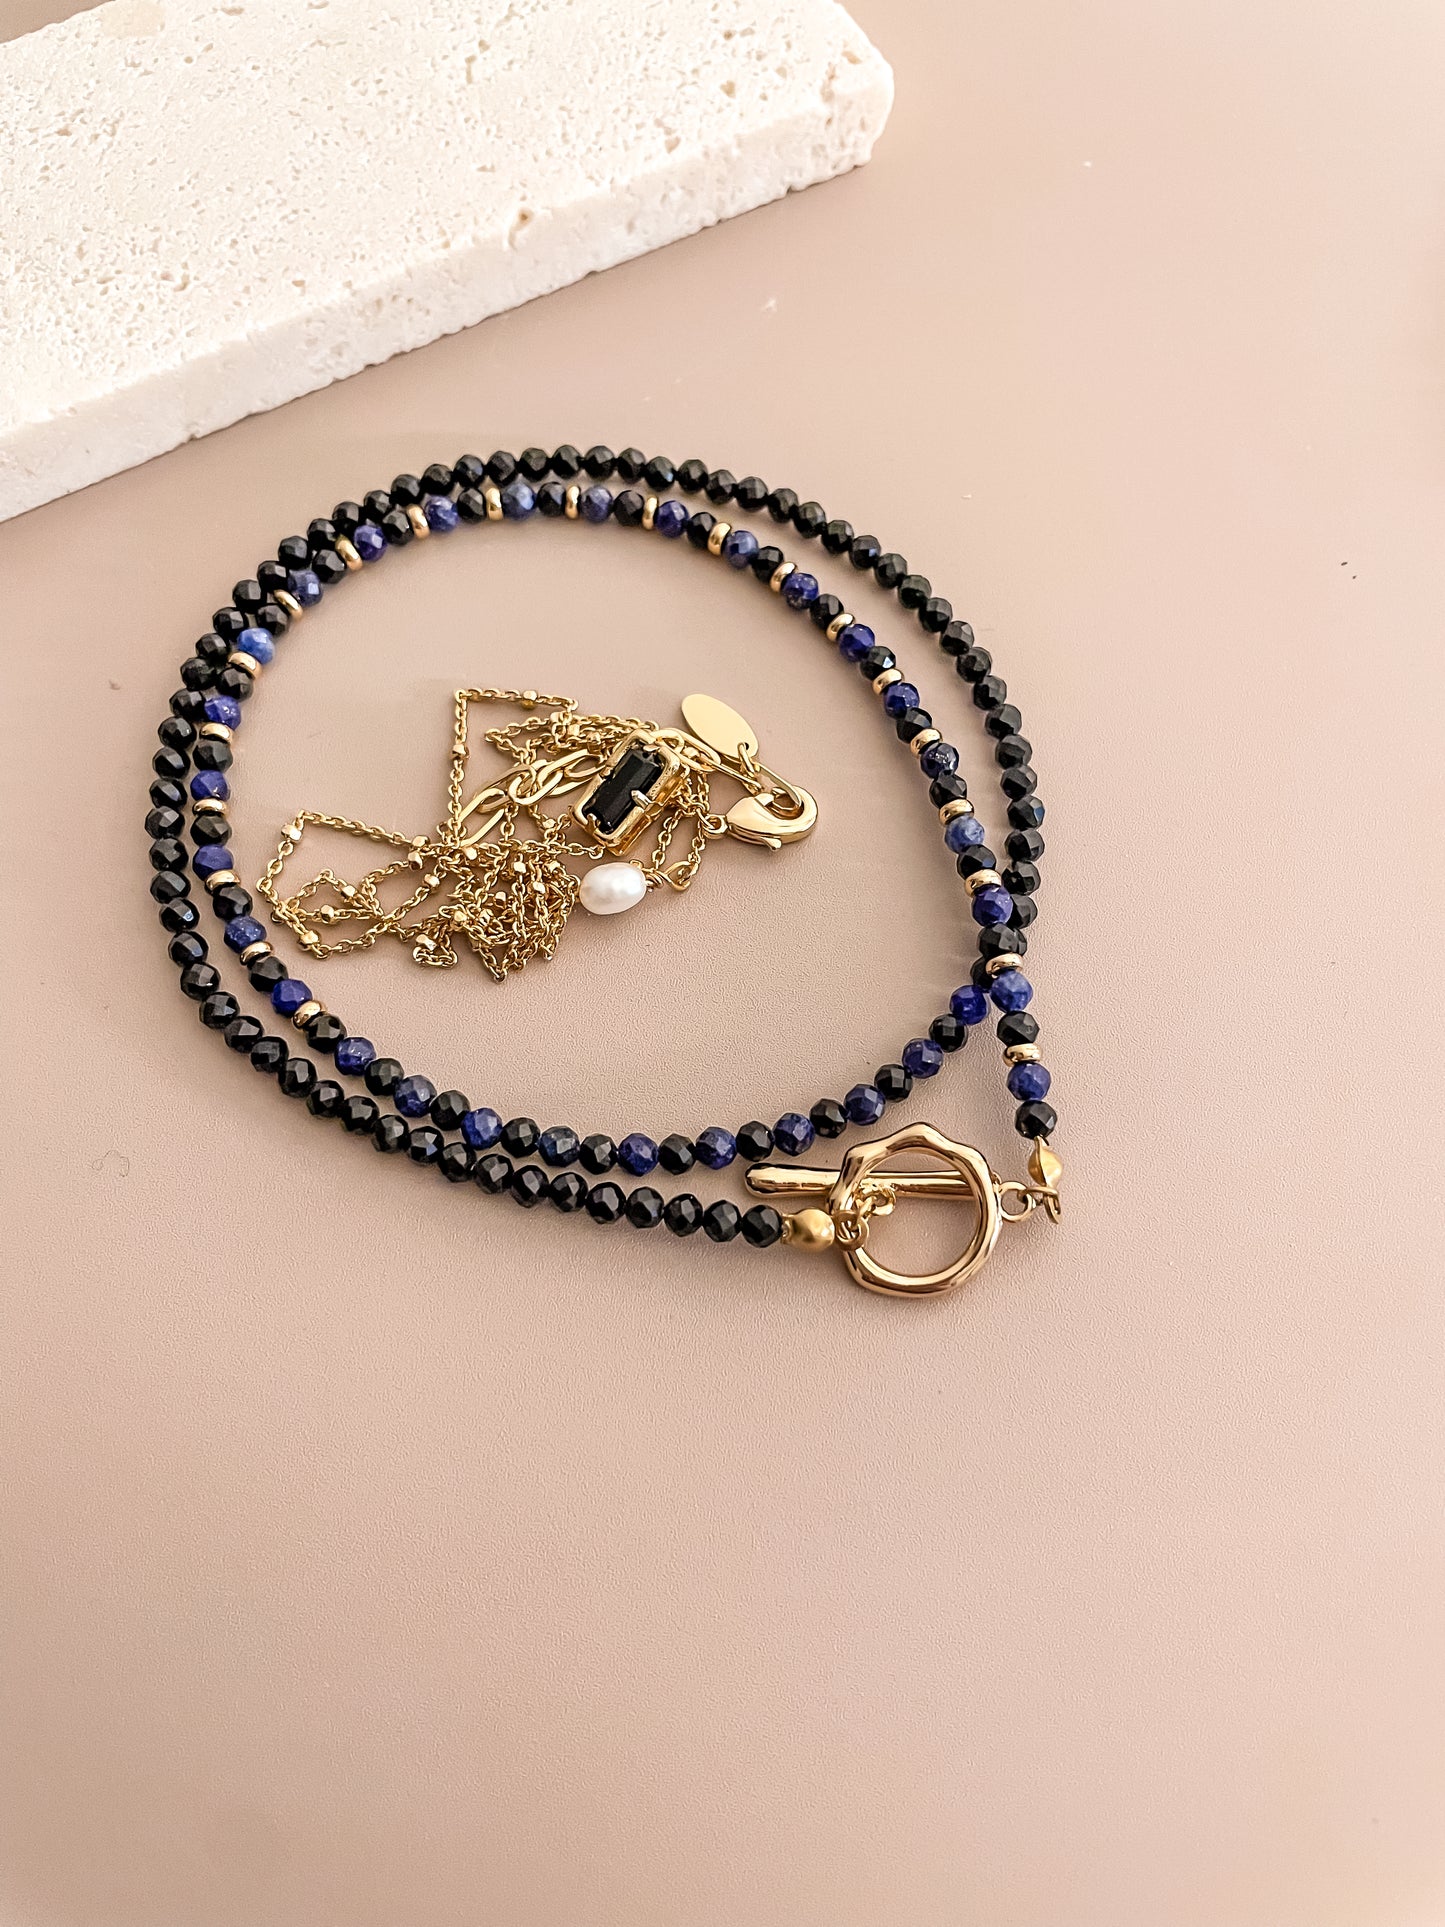 Lapis Lazuli And Black Spinel Beaded Necklace